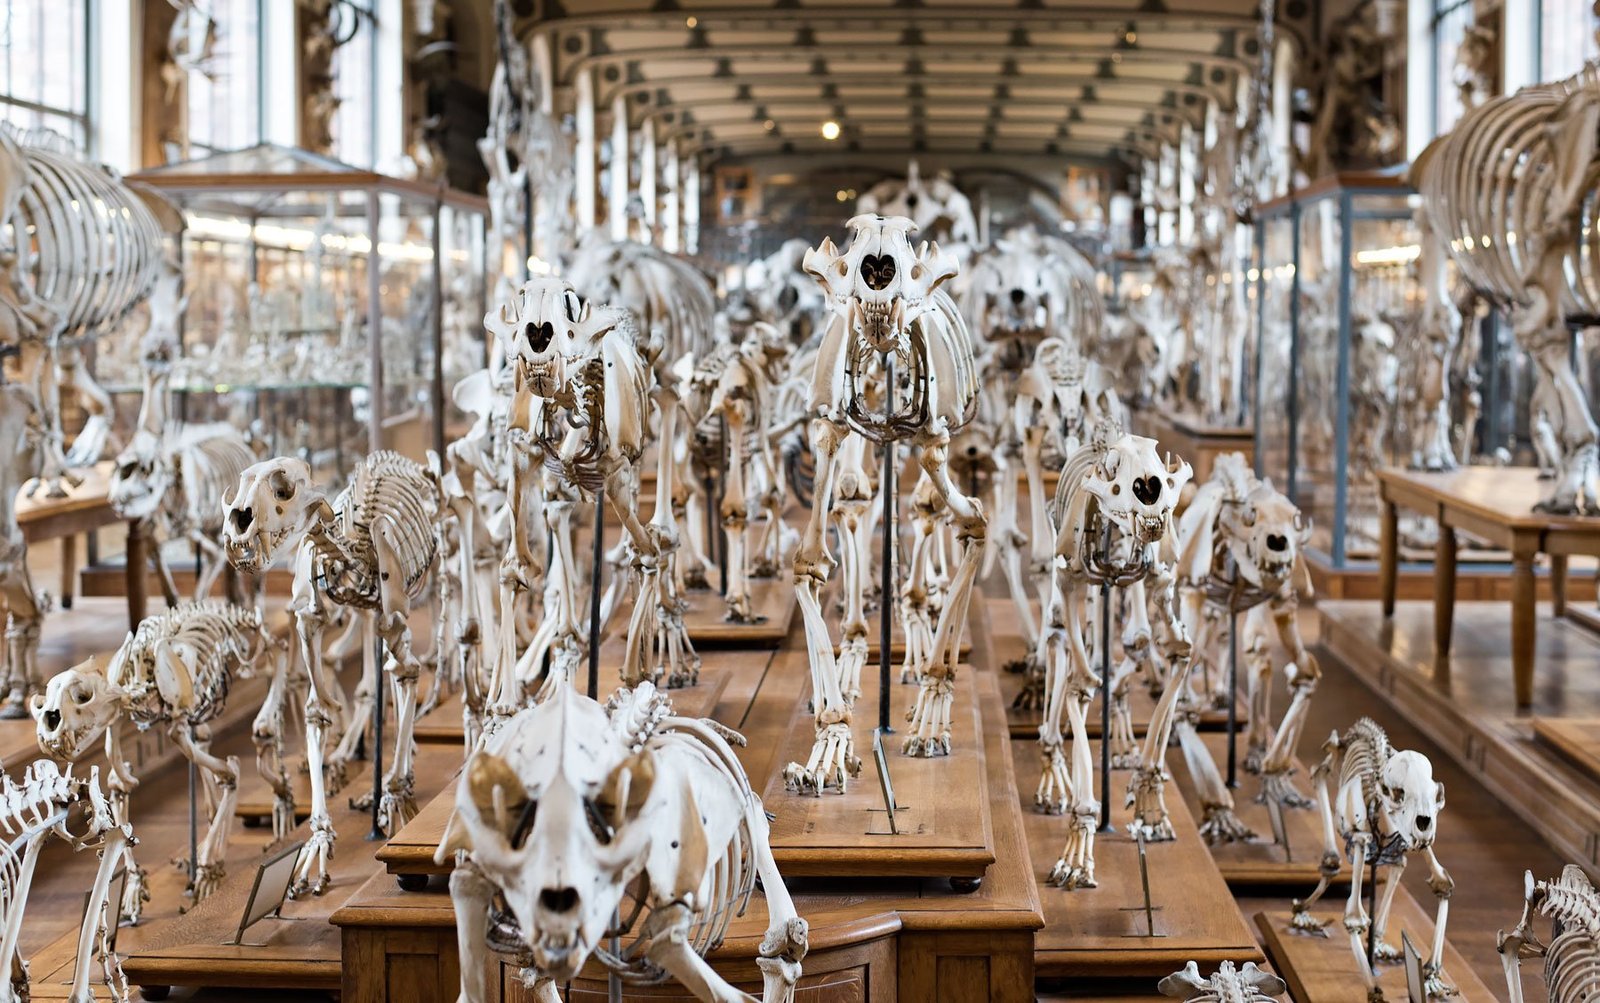 Ten amazing new places I discovered in Paris - Galerie de Paleontologie: animal skeletons (Museum of Natural History)